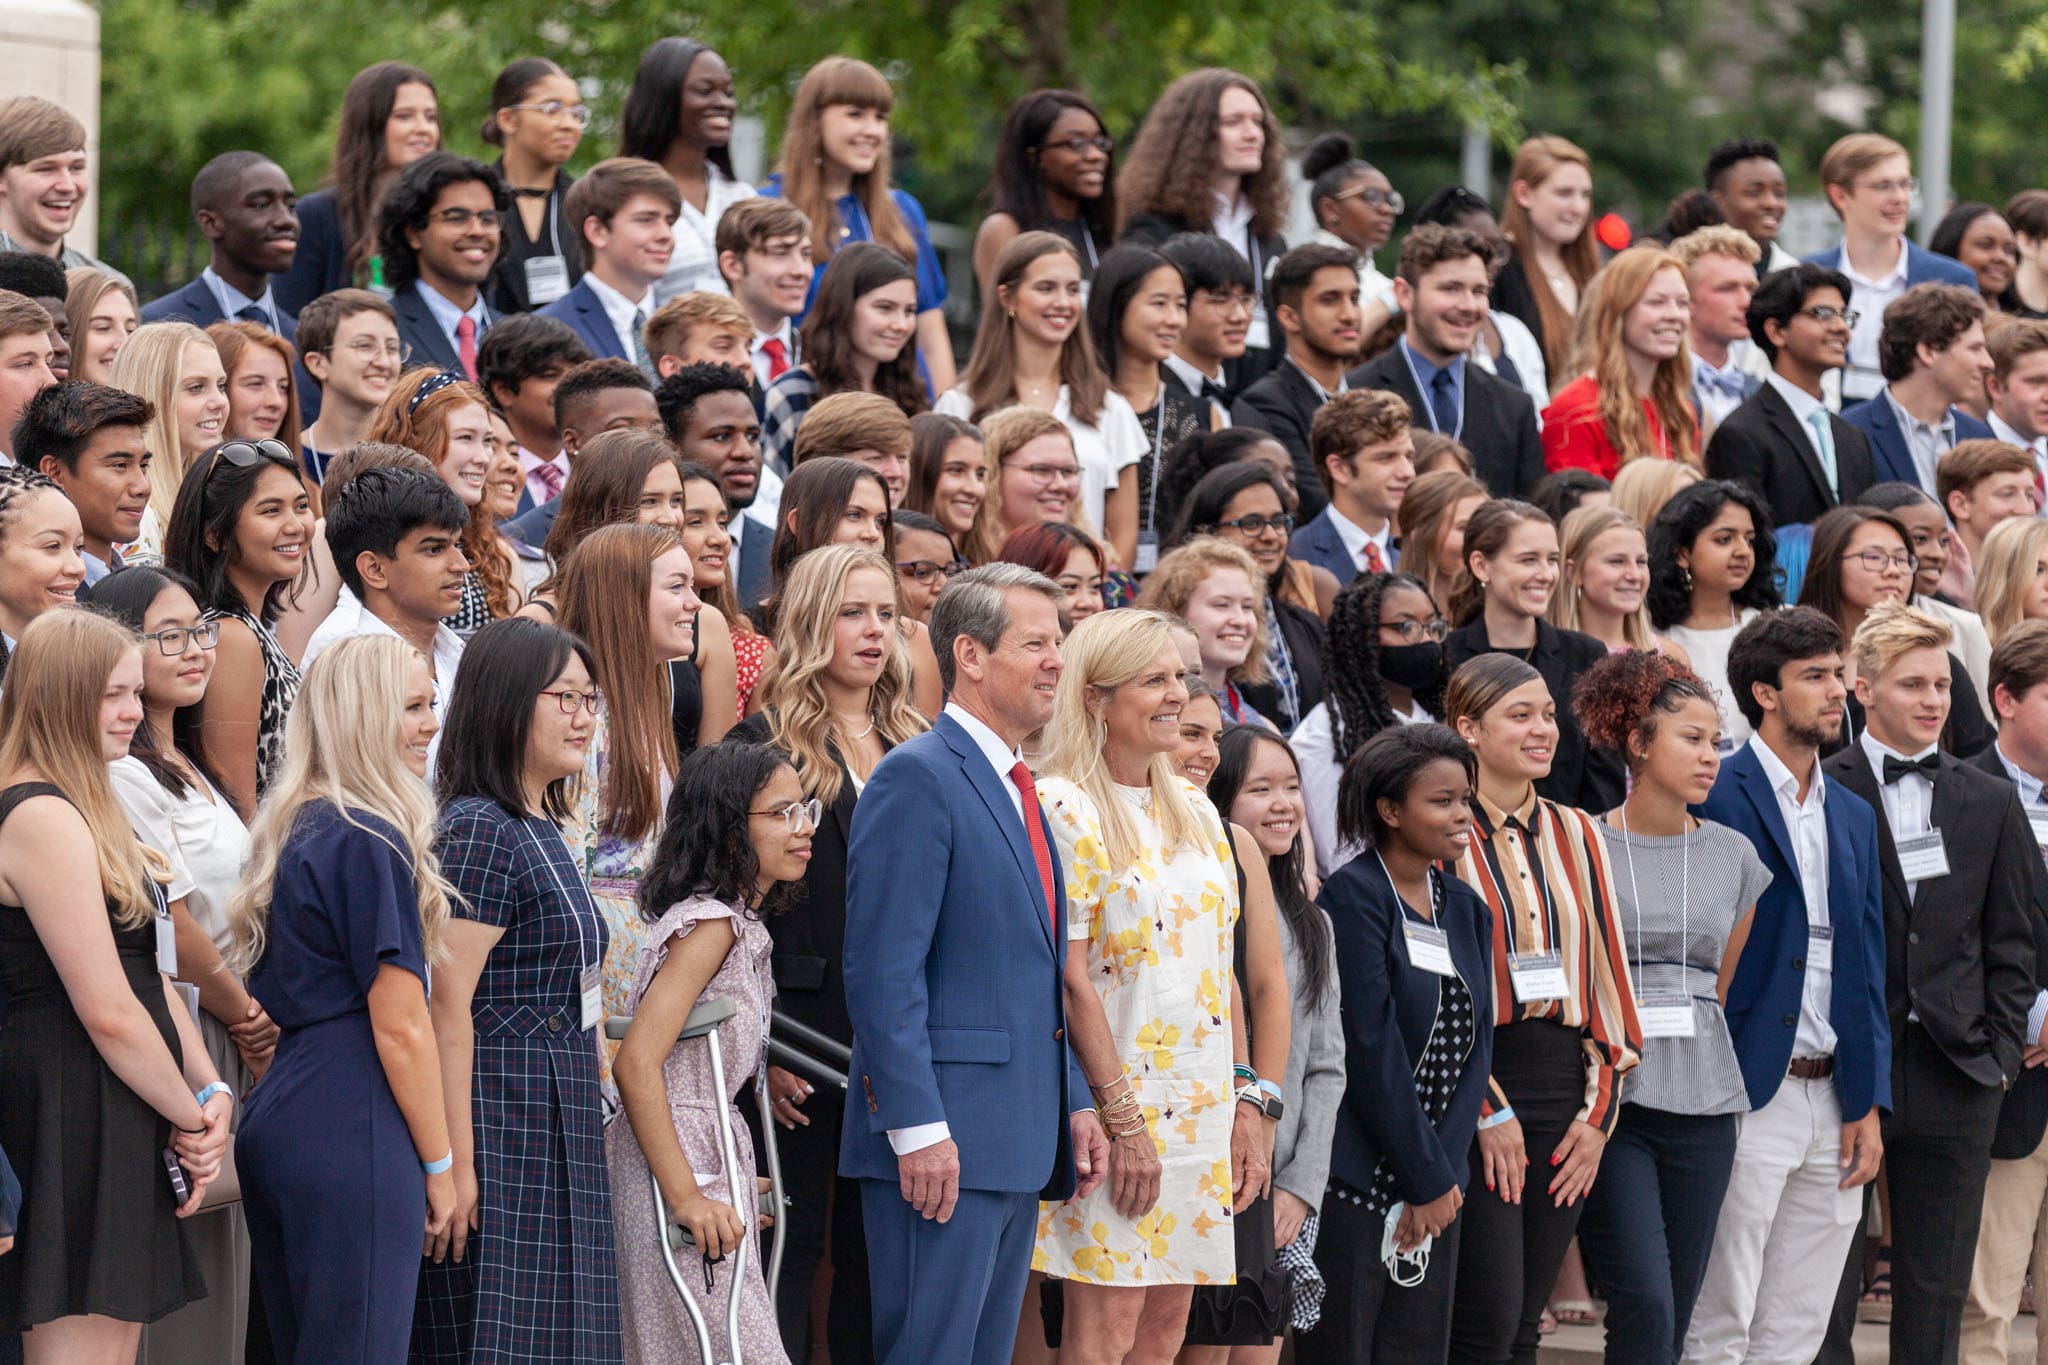 Georgia Governor Brian Kemp and First Lady Marty Kemp posing with hundreds of Georgia high school valedictorians in Liberty Plaza next to the Georgia State Capitol.